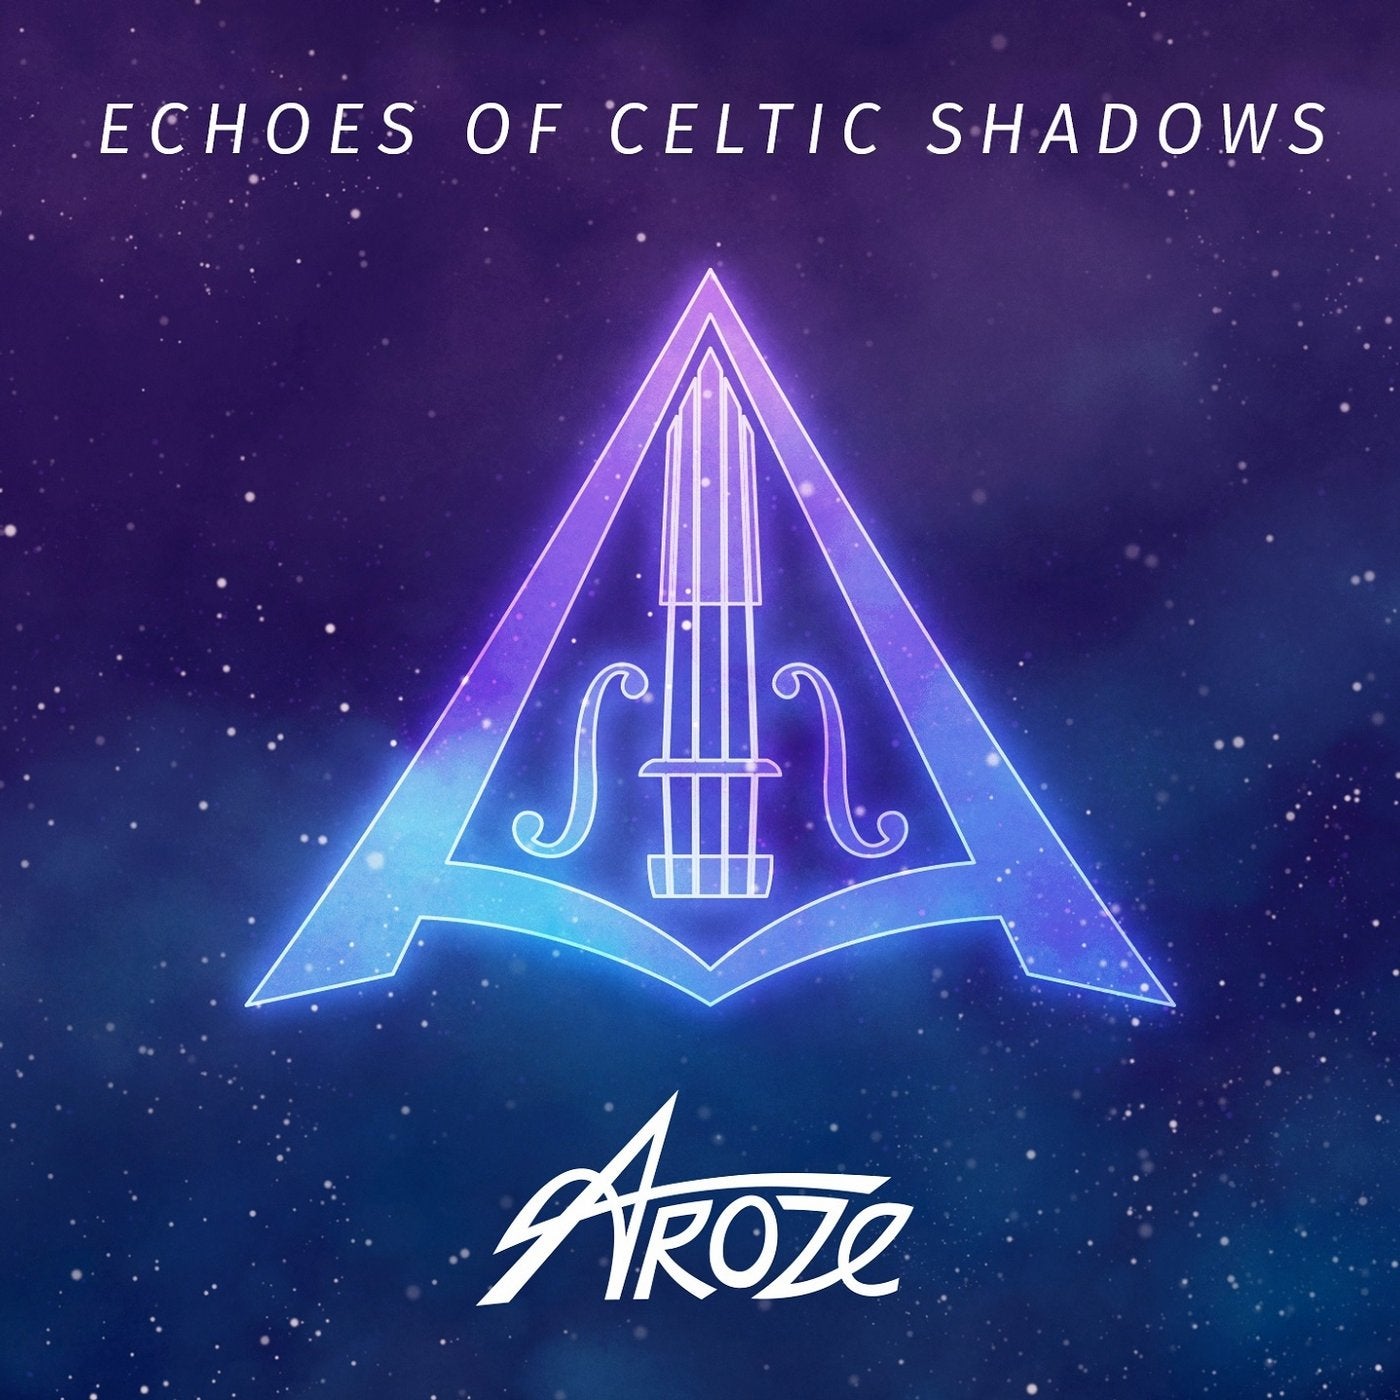 Echoes of Celtic Shadows